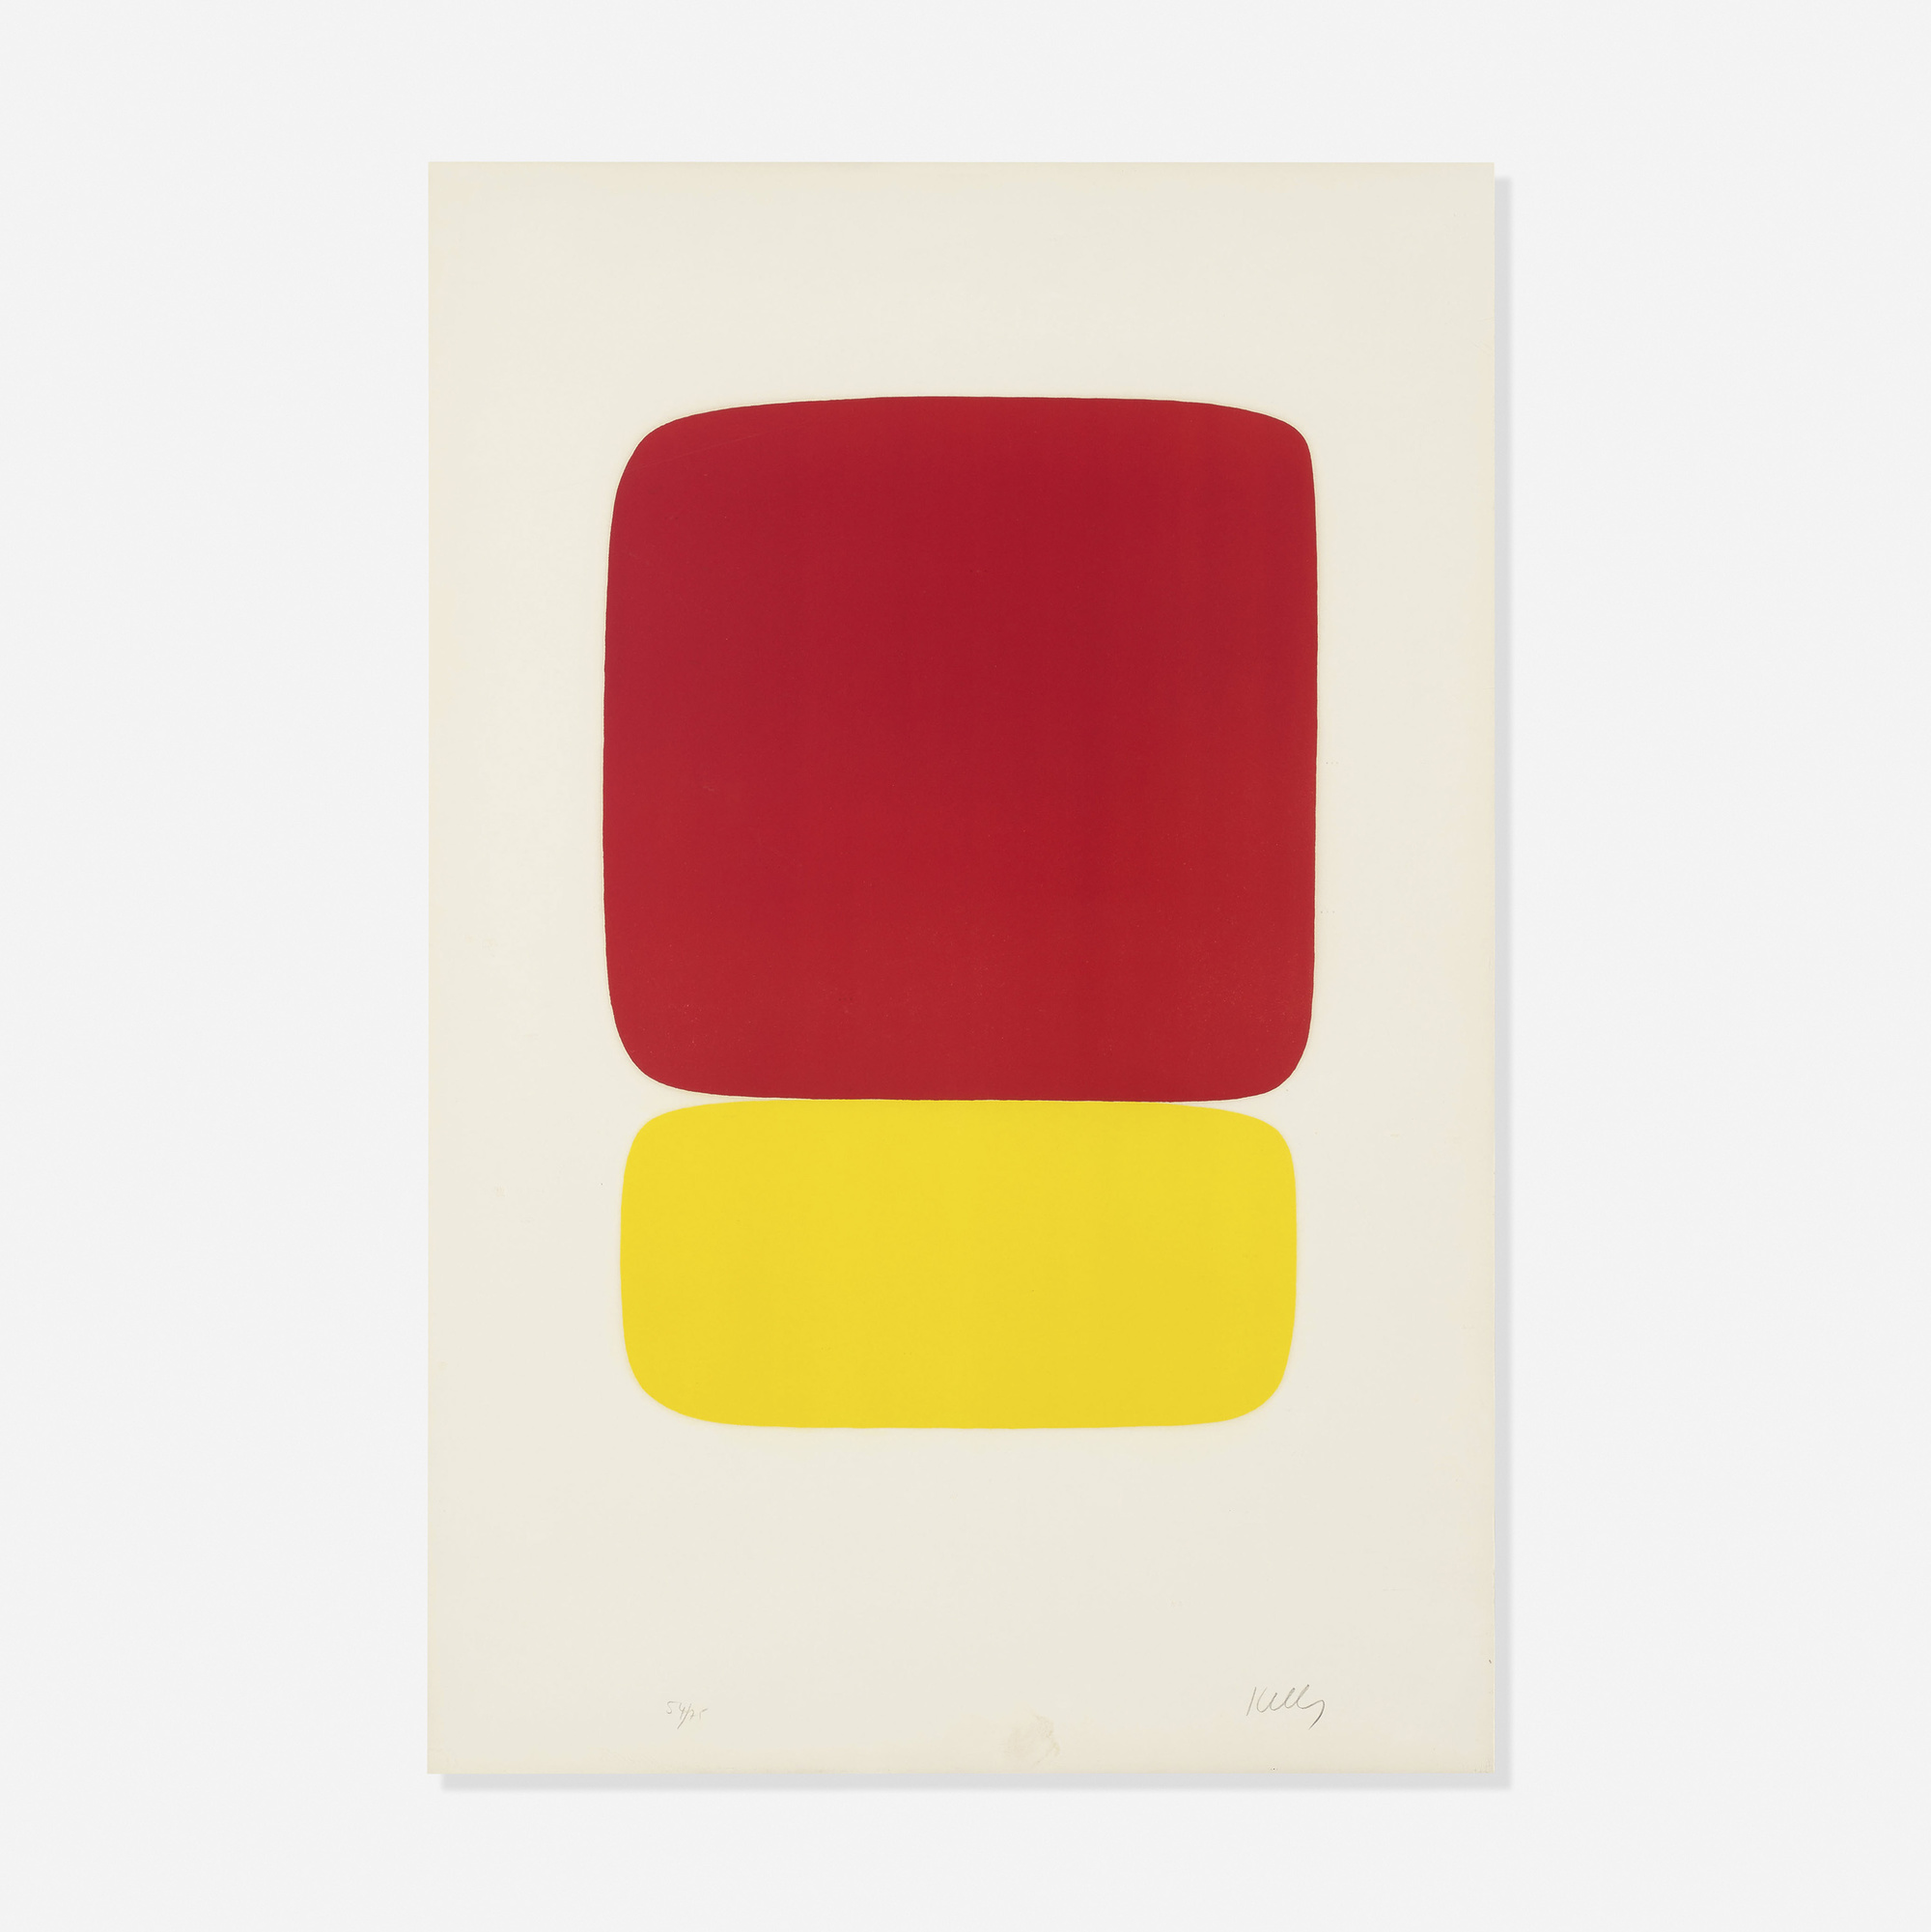 114: ELLSWORTH KELLY, Red over Yellow (from the Suite of Twenty ...